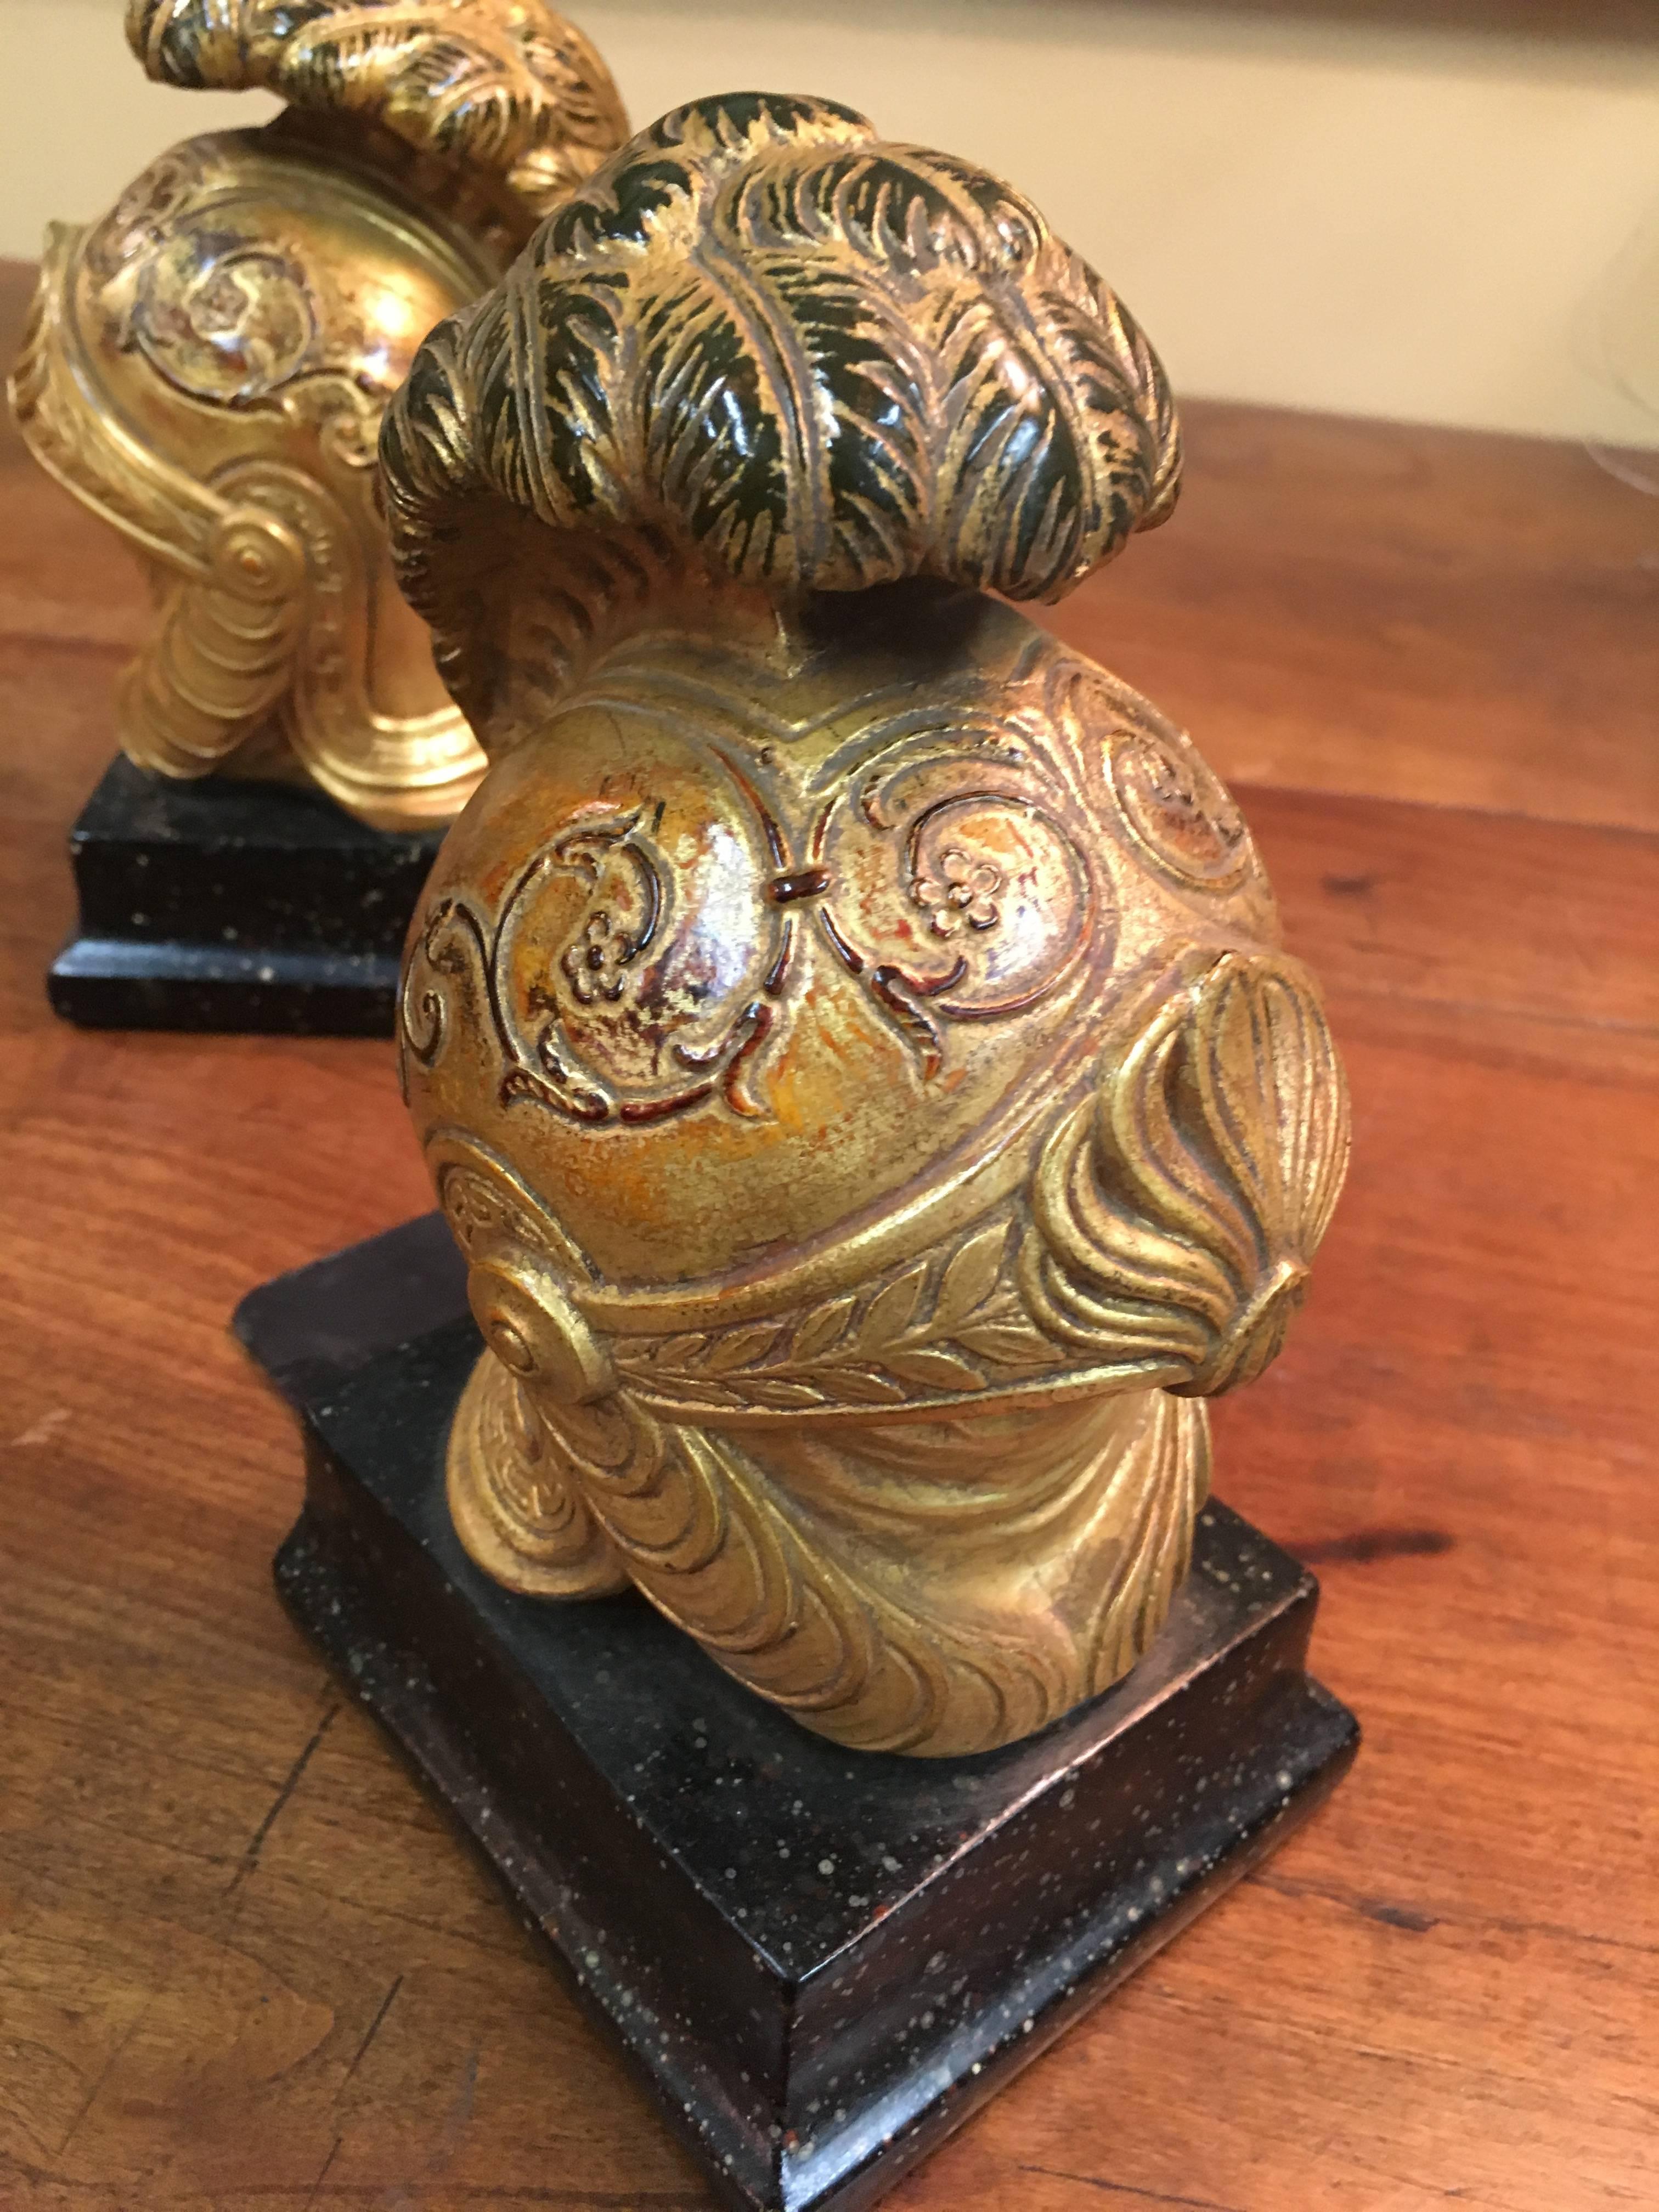 Stunning pair of Roman Galea Book ends - gilt and impressive. For the Roman Enthusiast or if you just really into helmets! These are great for the kids room or masculine office - or perhaps your a Damsel, but secretly wished you were a Knight!